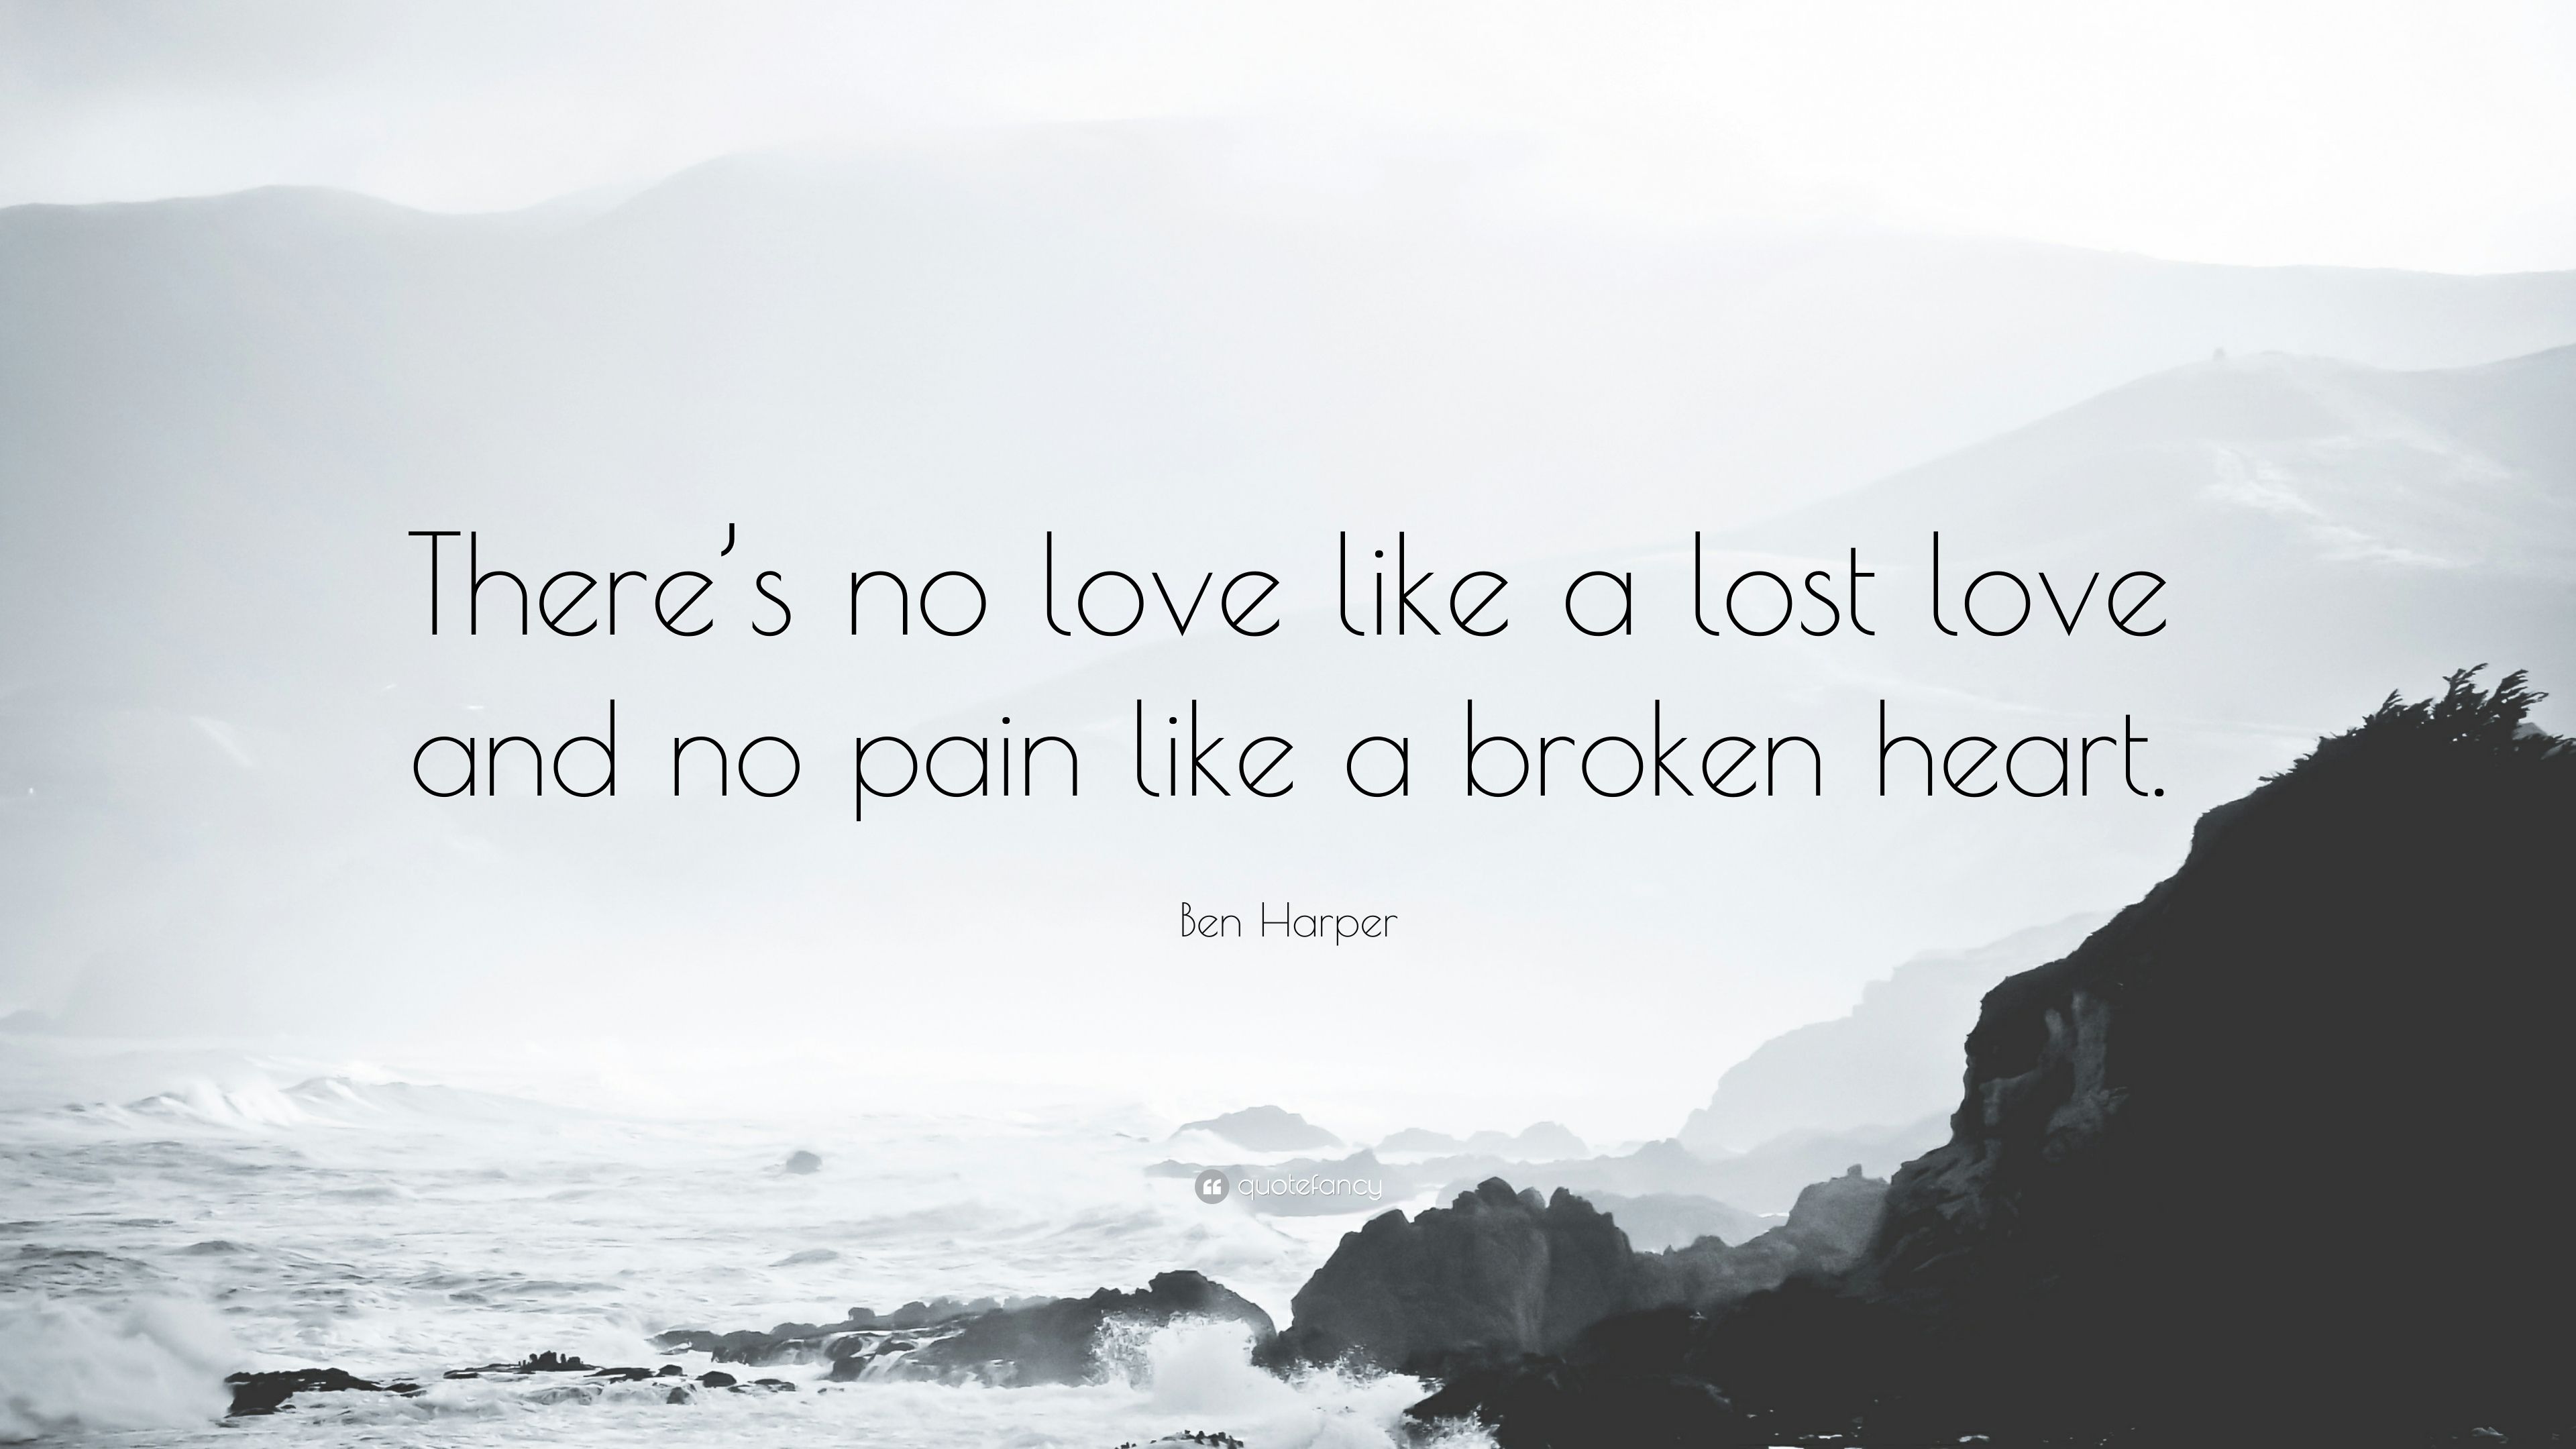 Ben Harper Quote: “There's no love like a lost love and no pain like a broken heart.” (7 wallpaper)